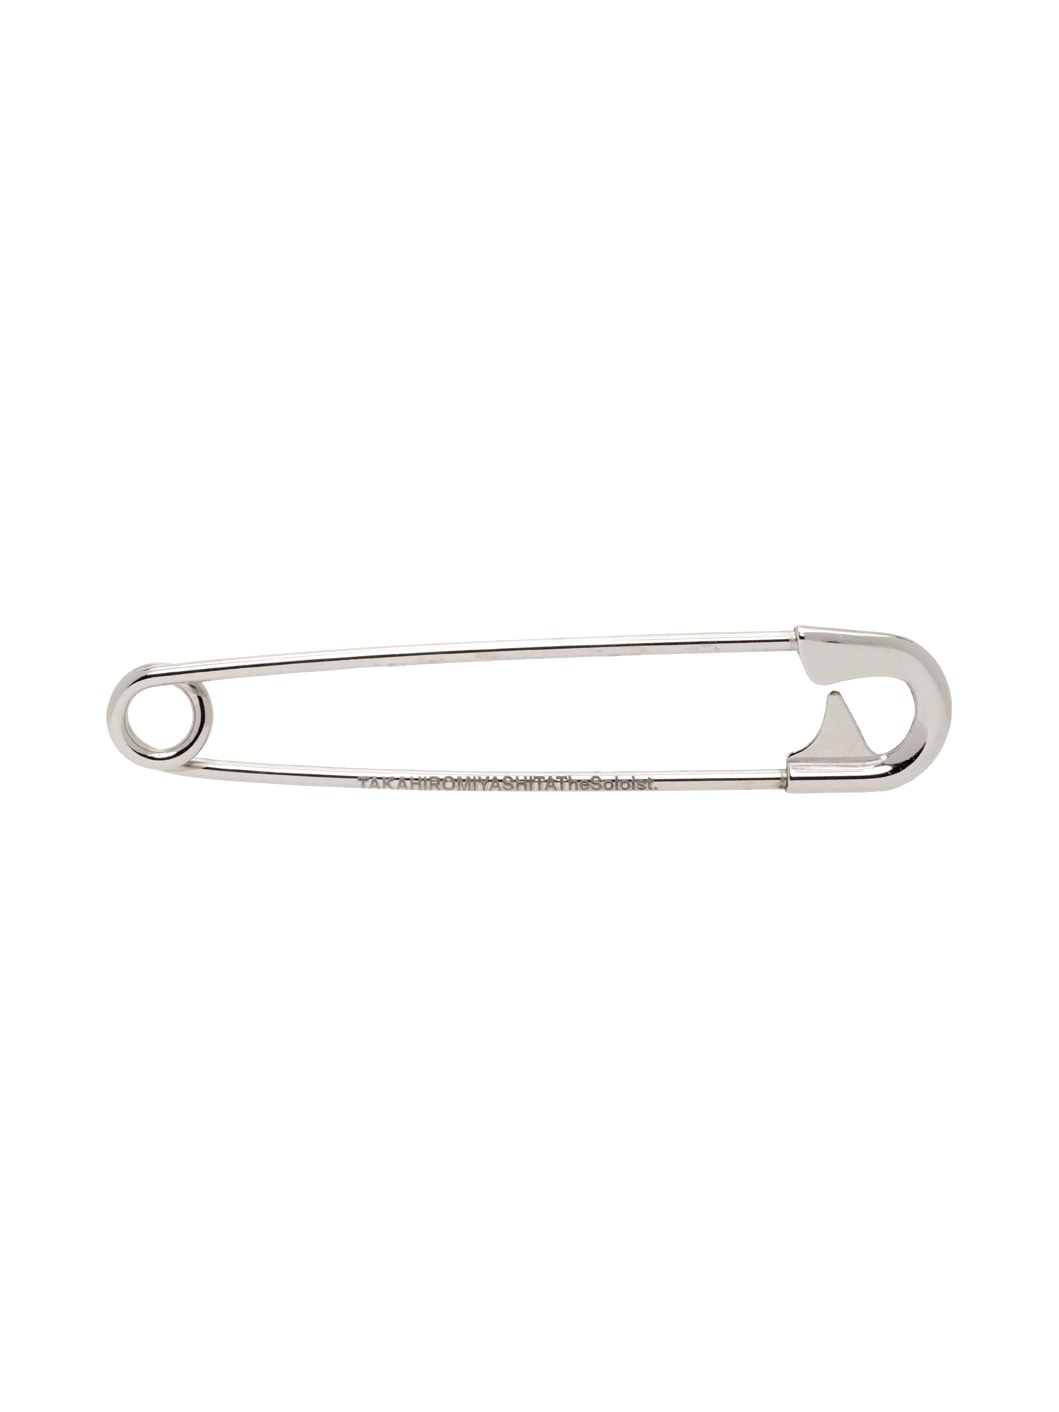 Silver Safety Pin - 1